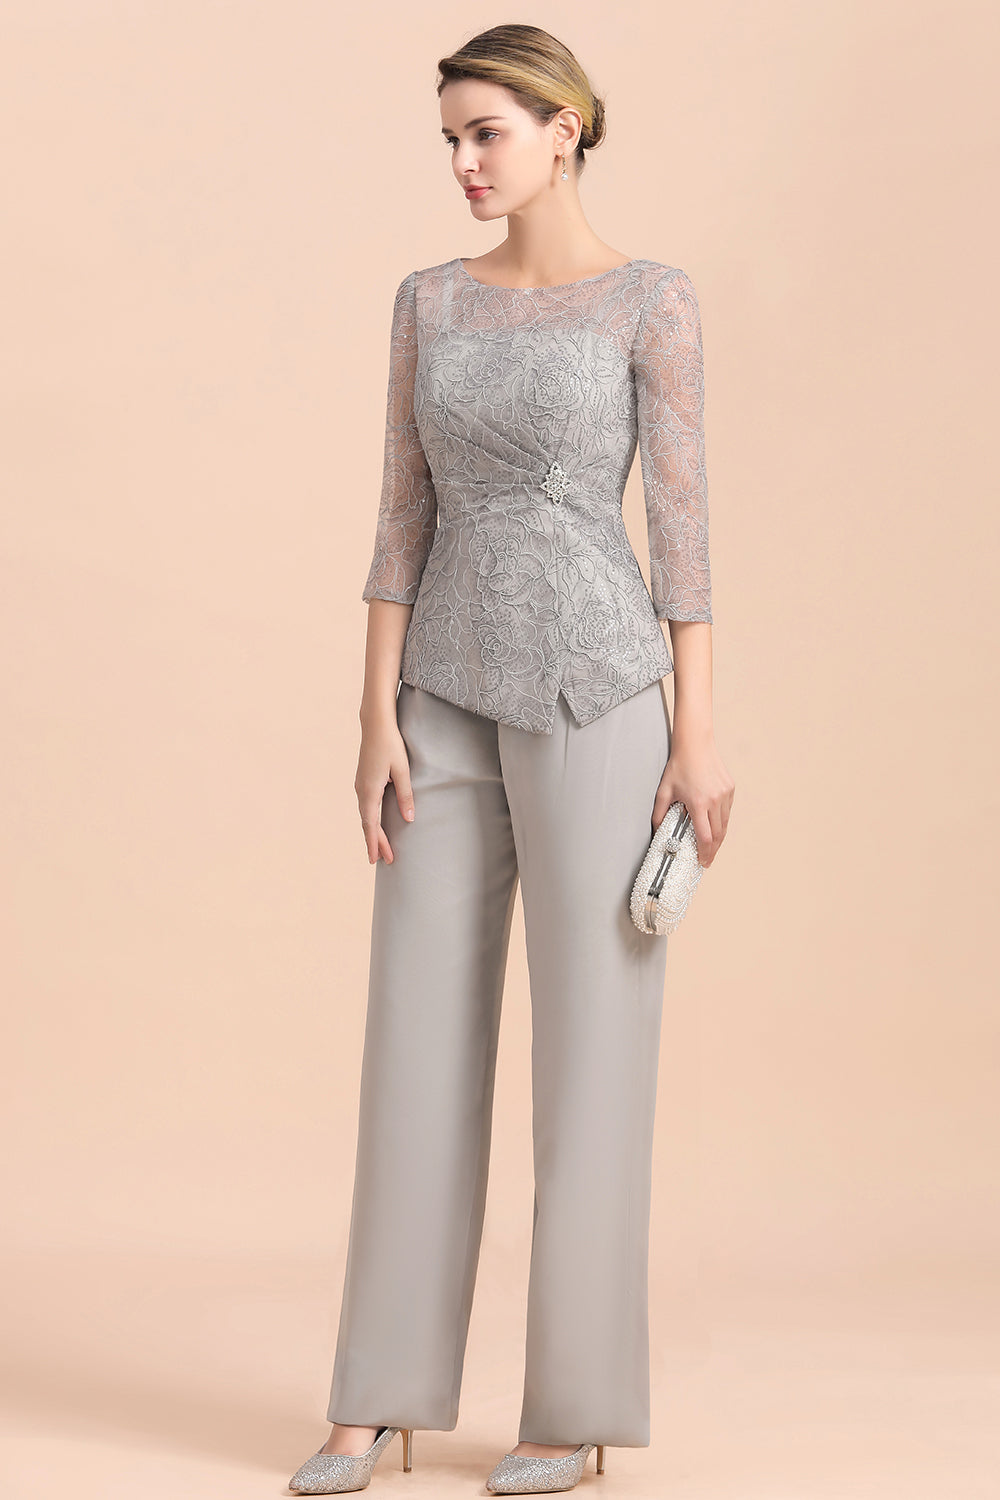 Elegant 3/4 Sleeves Lace Chiffon Affordable Mother of Bride Jumpsuit Online